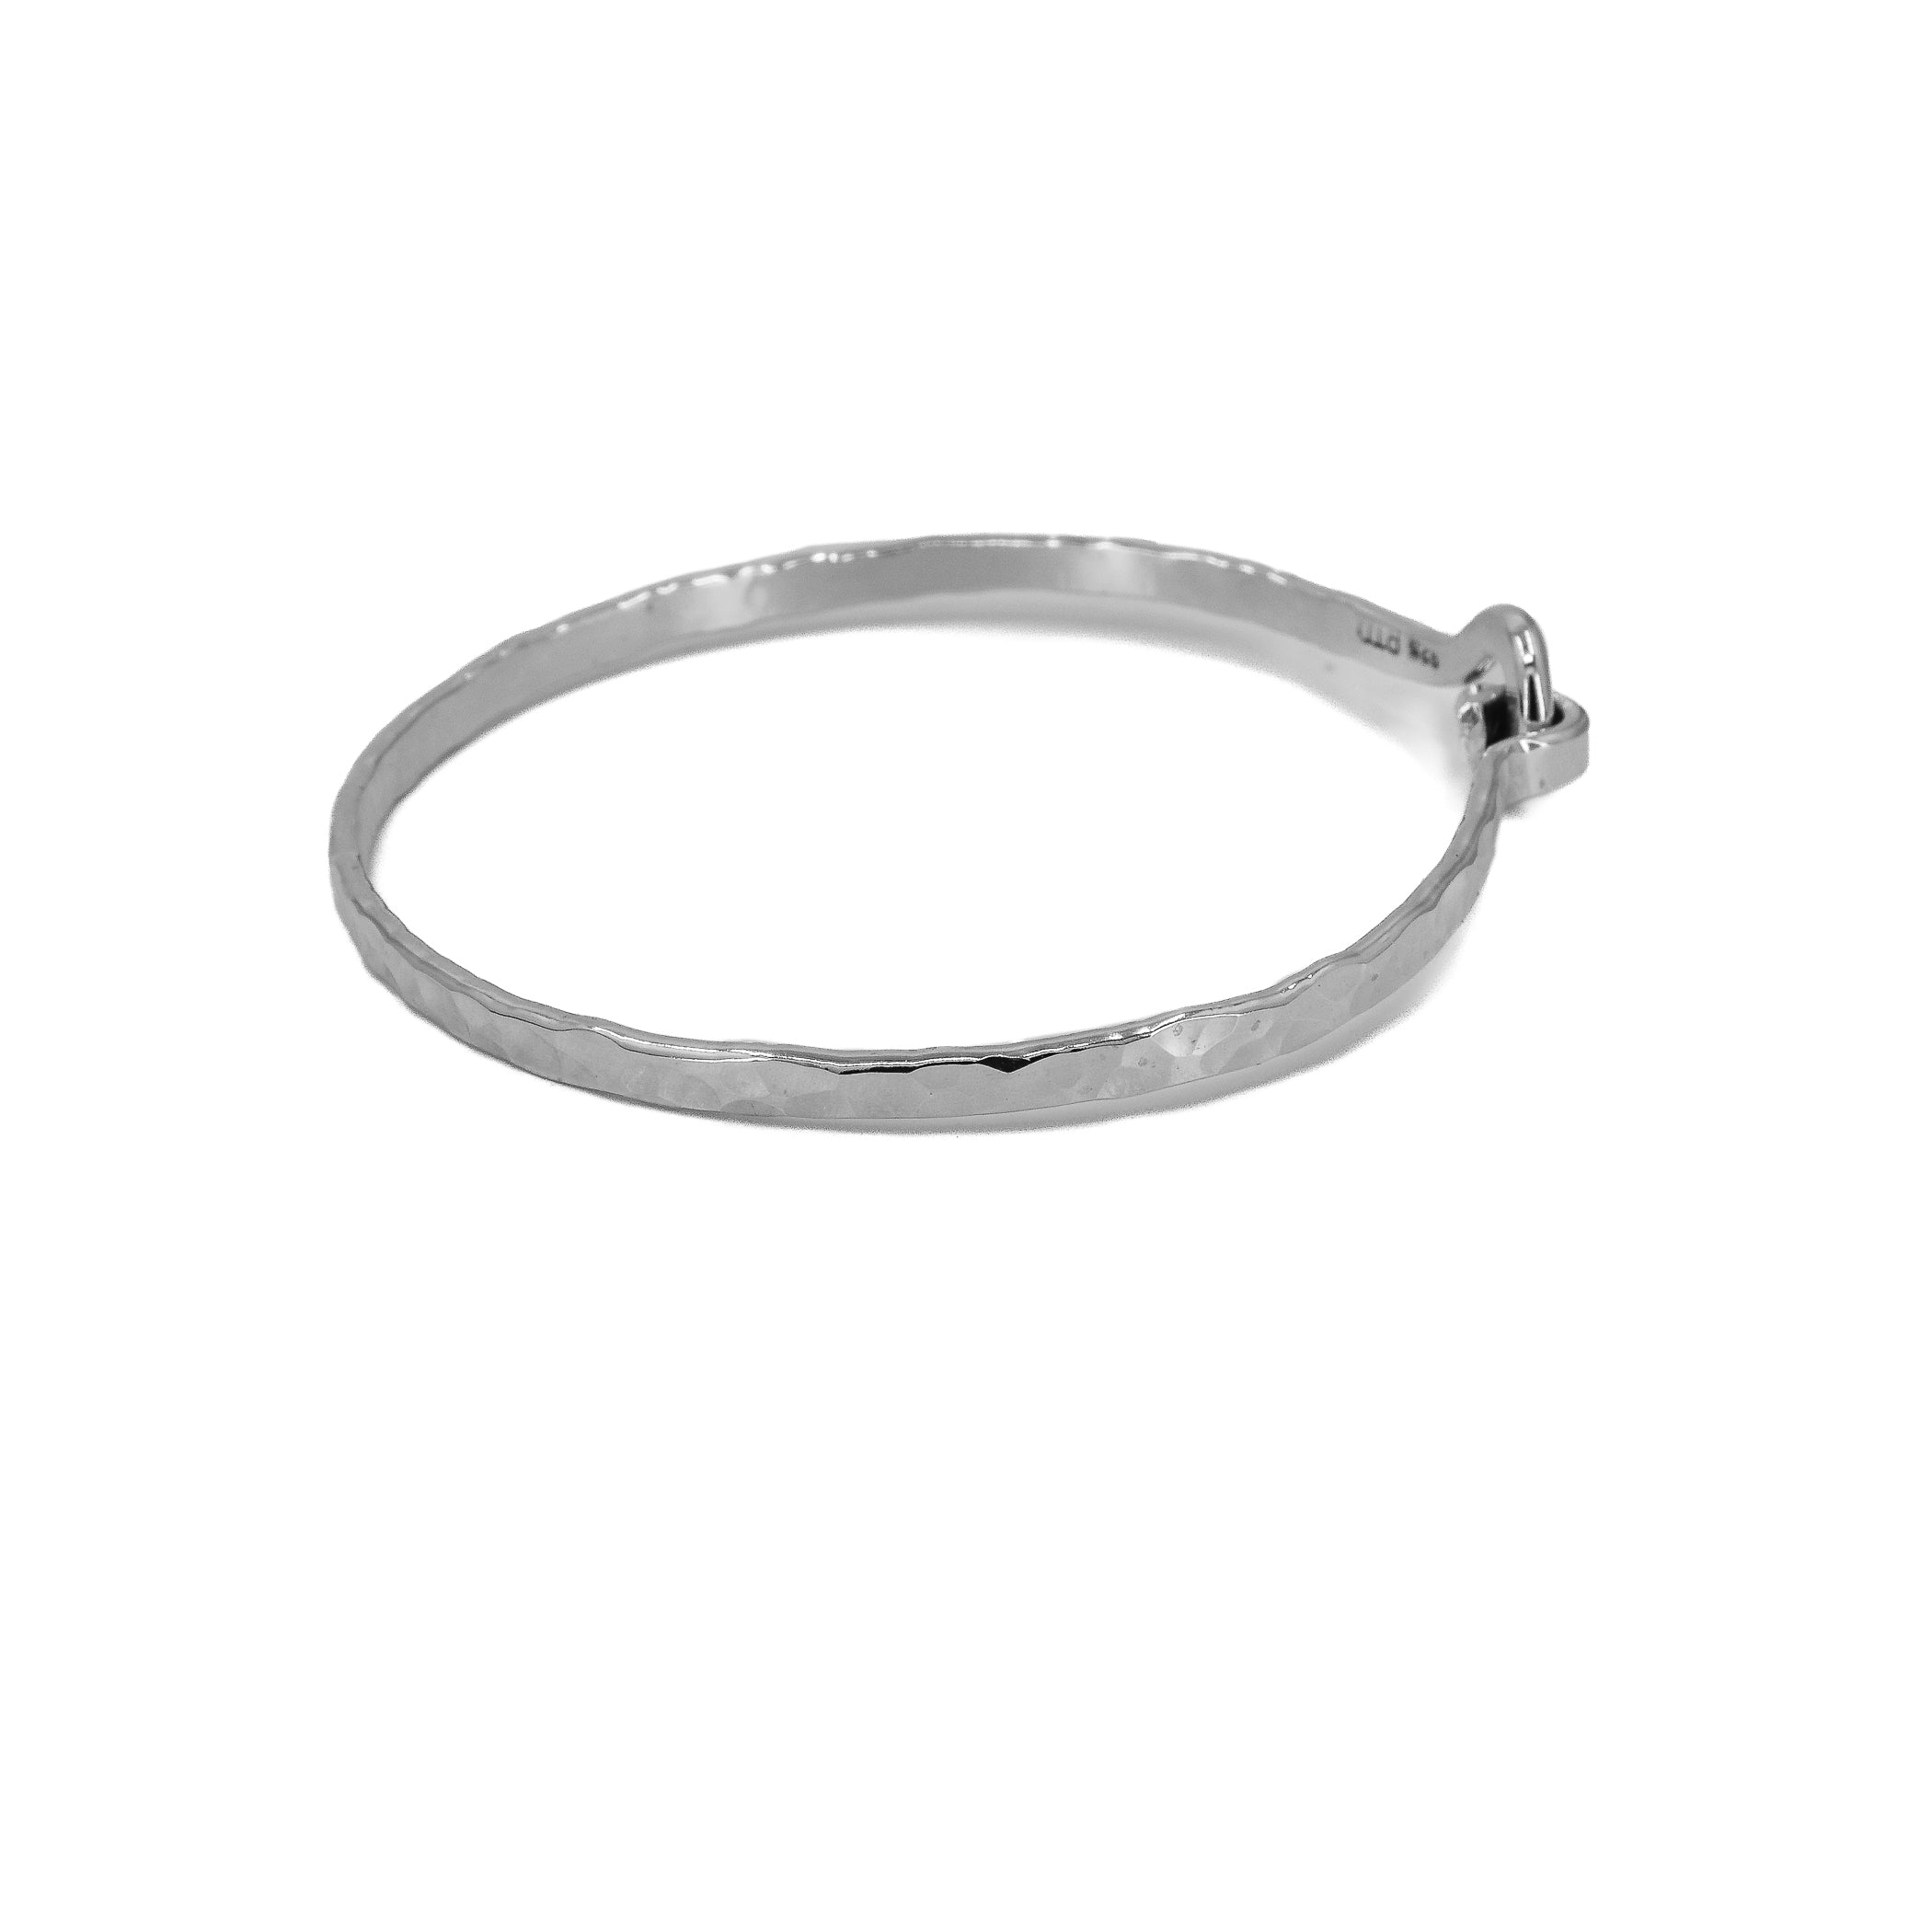 The Heavy Weight Open Bangle Bracelet - Hammered